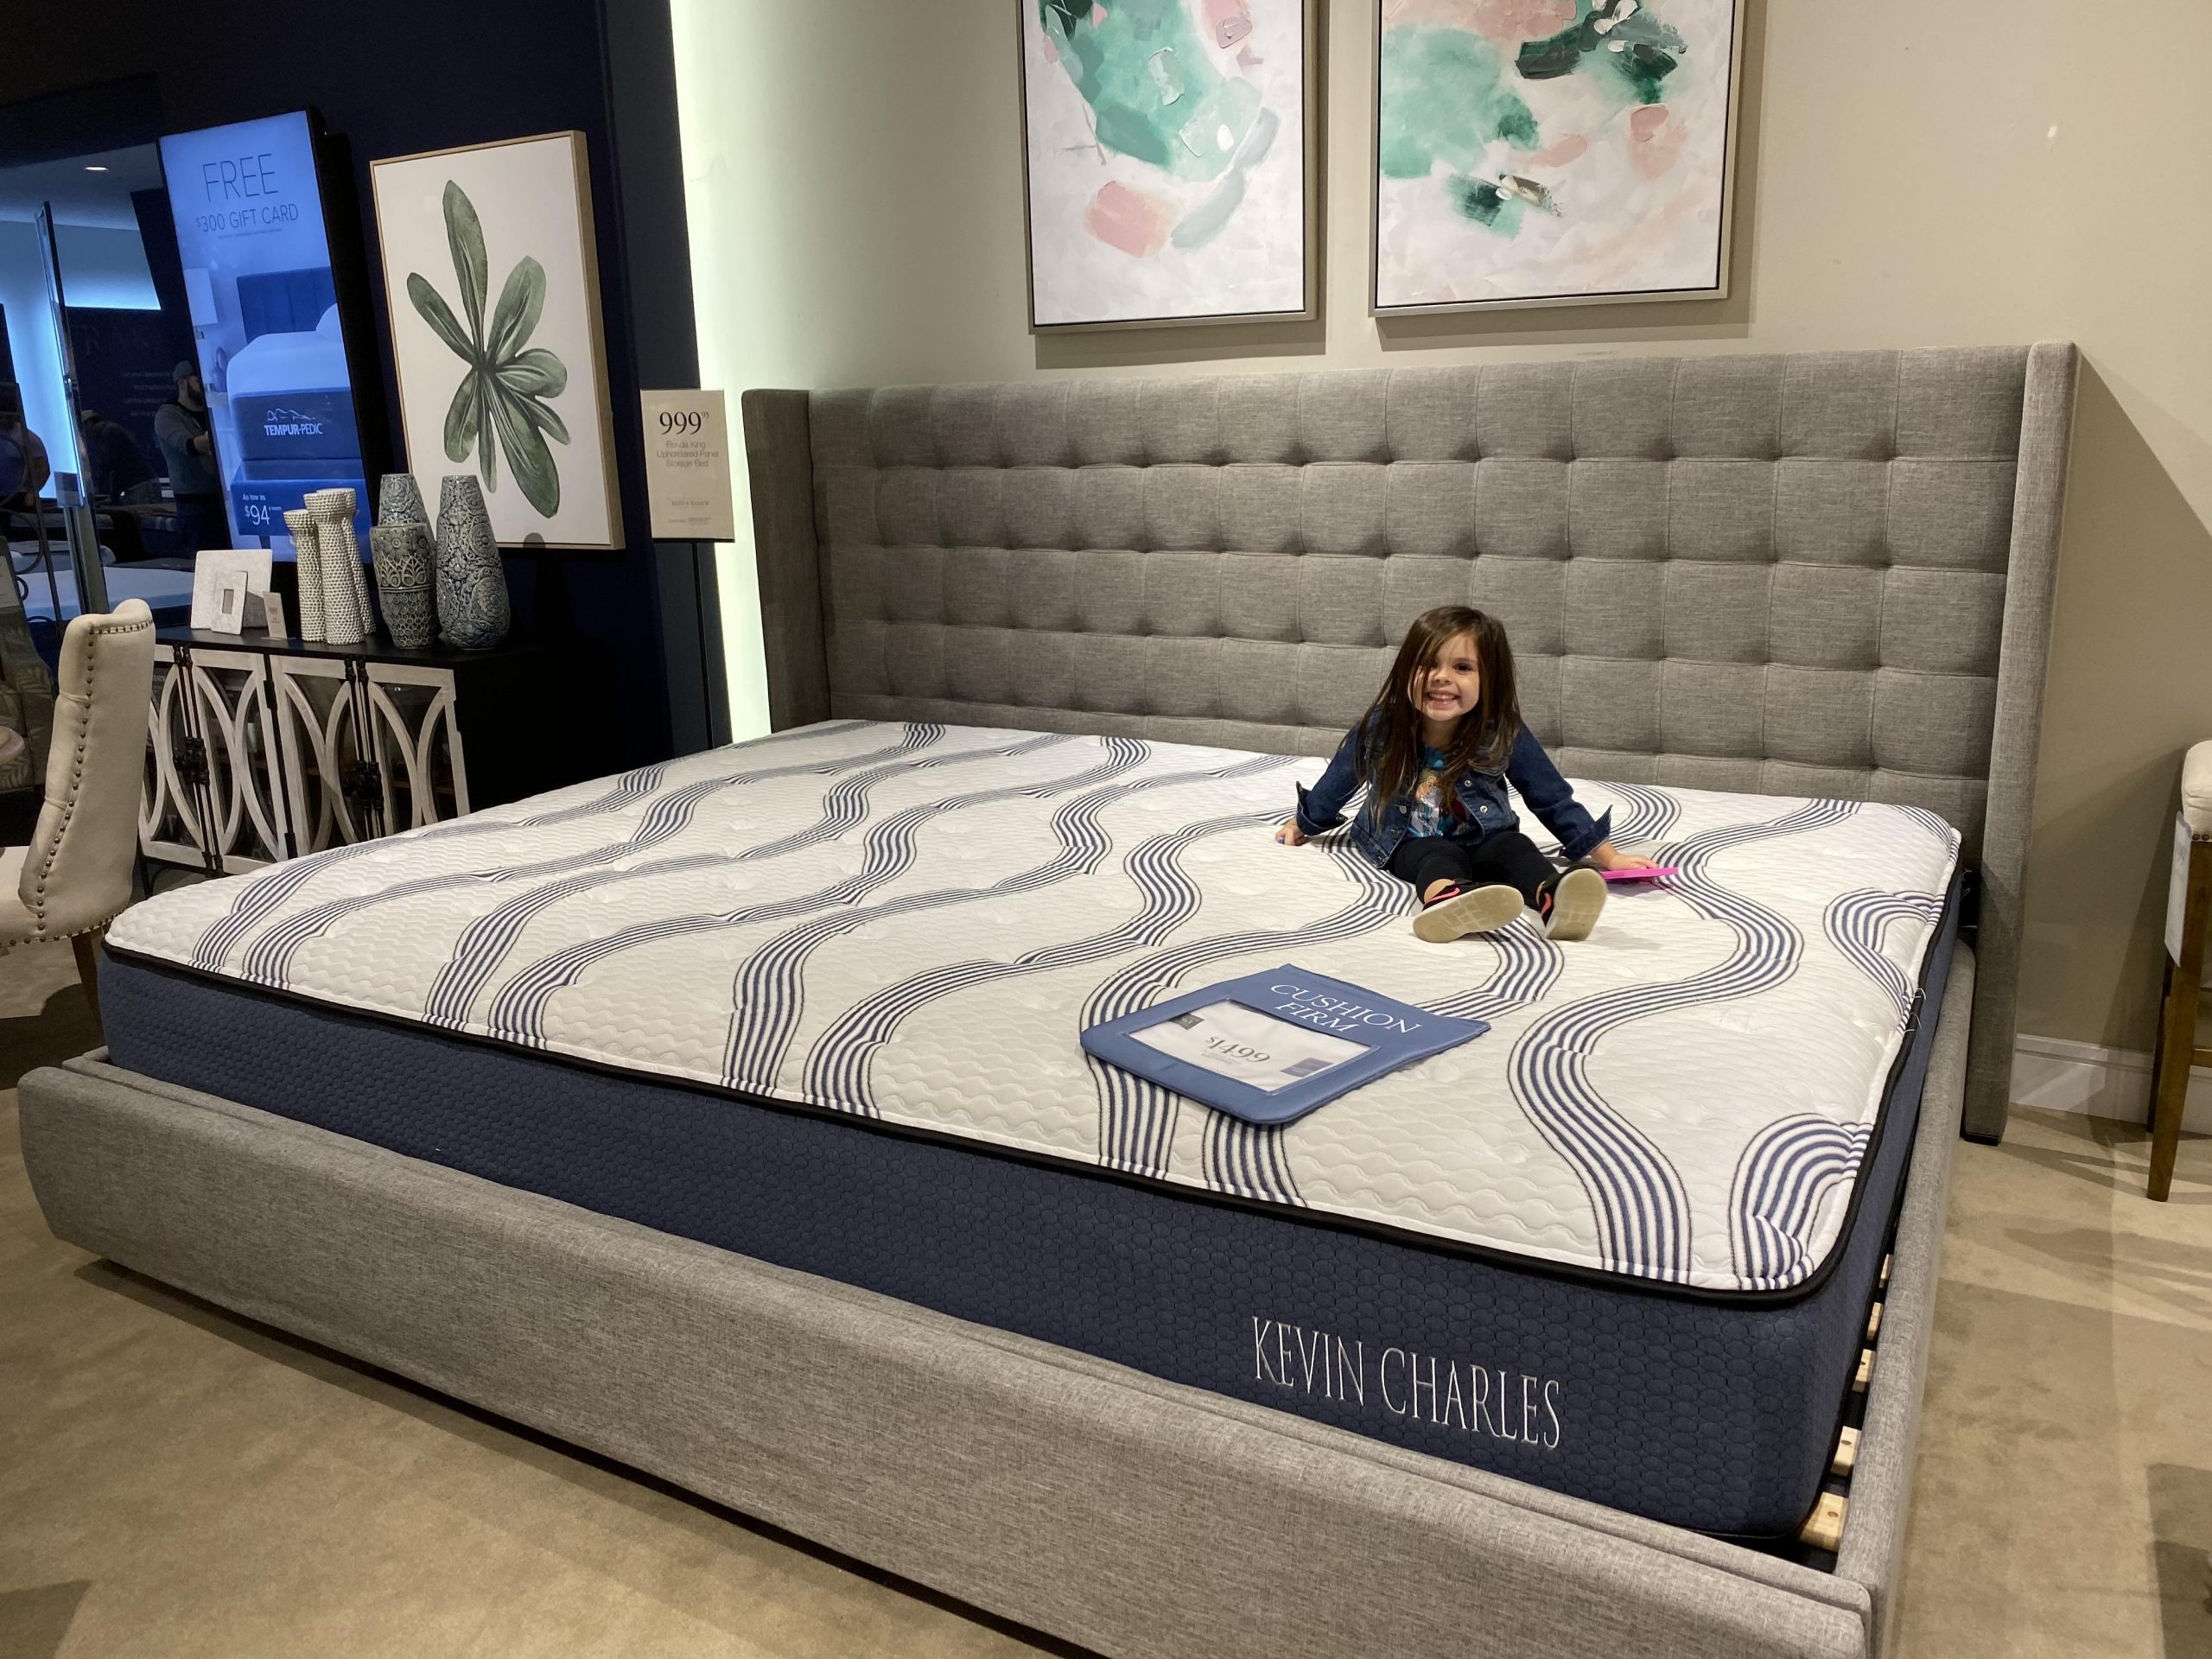 This absolute unit of a bed